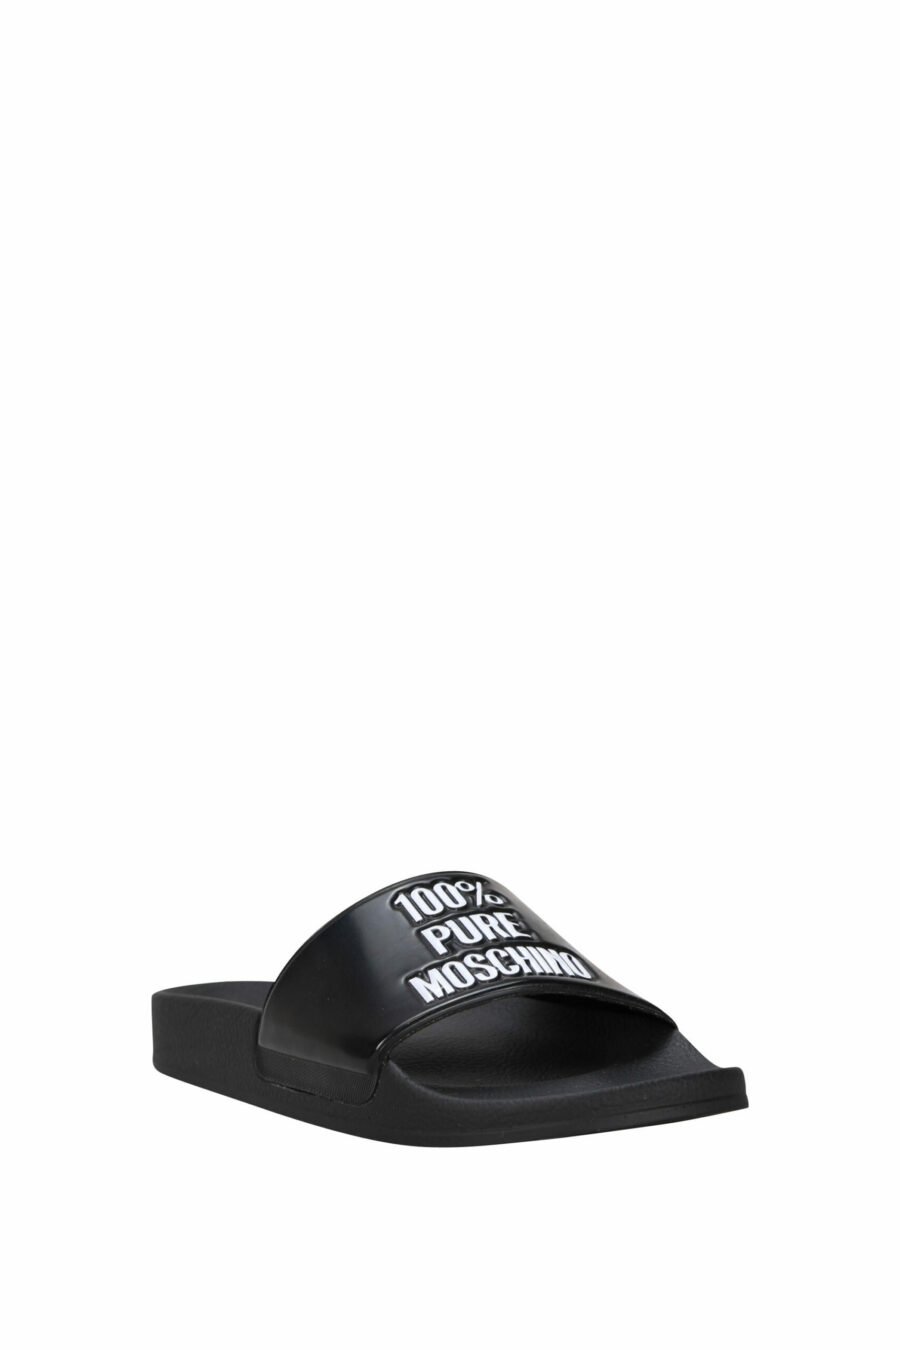 Black flip flops with logo "100% pure moschino" - 8054388527972 1 scaled